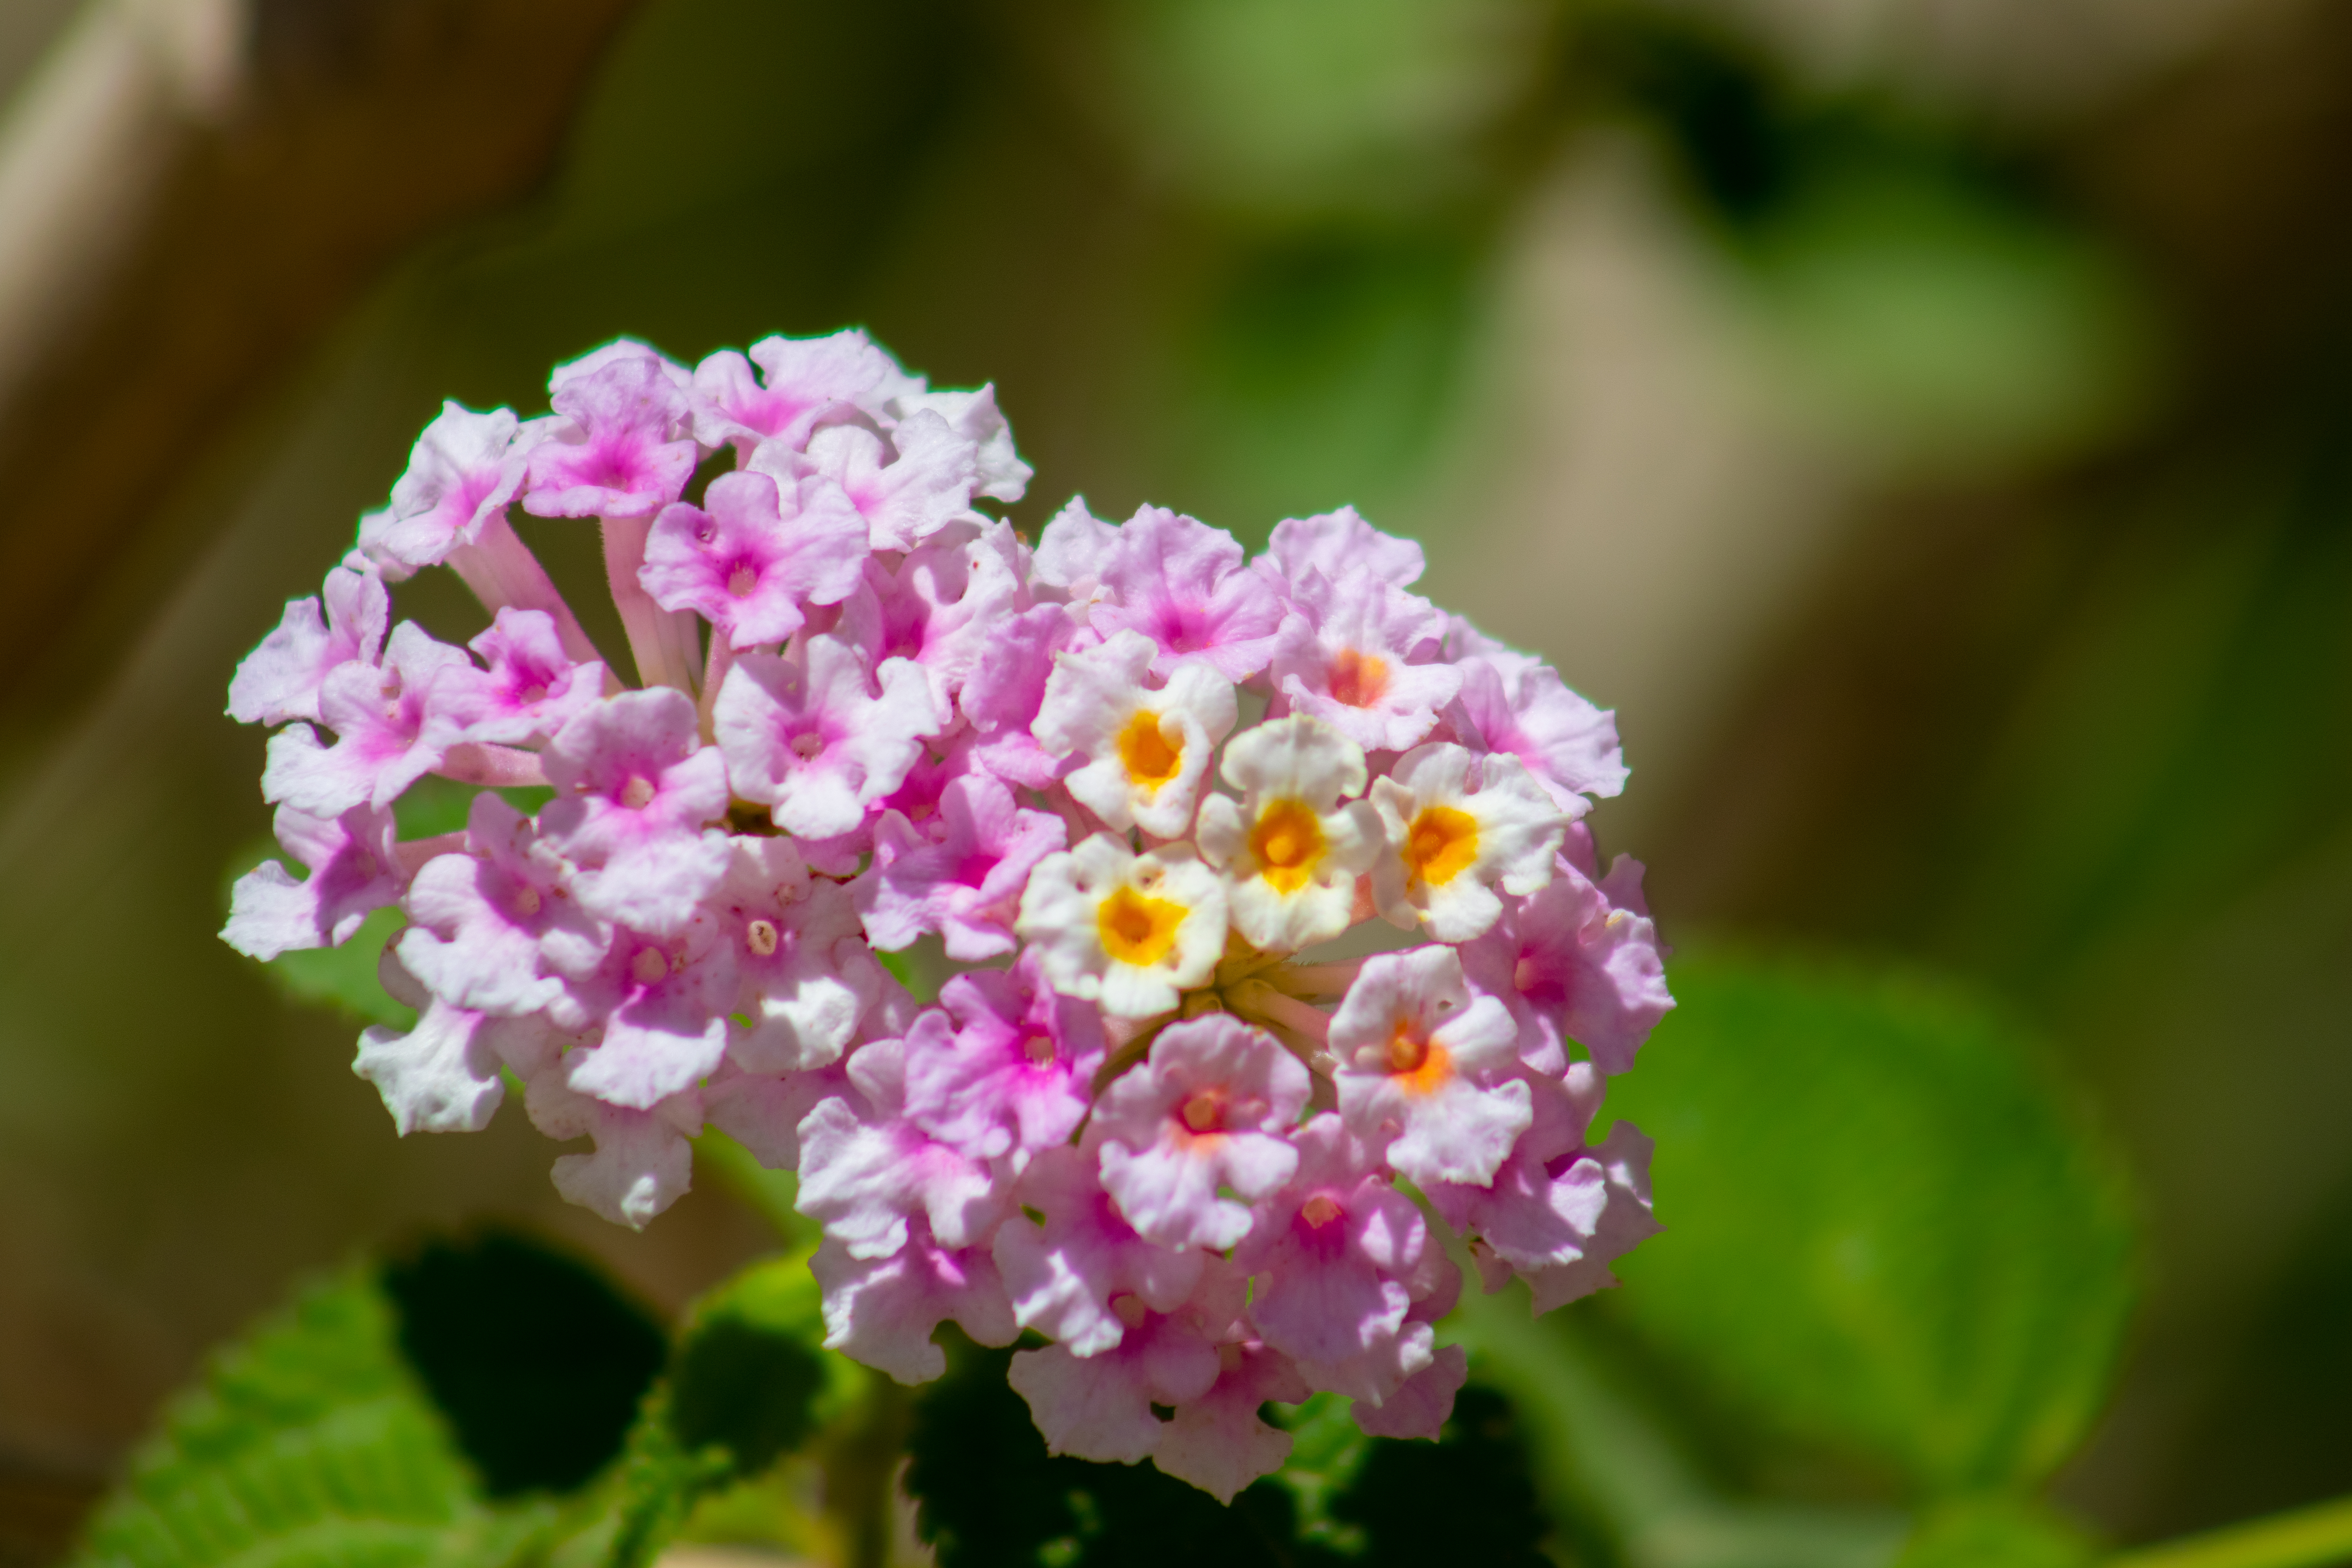 General 5472x3648 flowers colorful nature plants